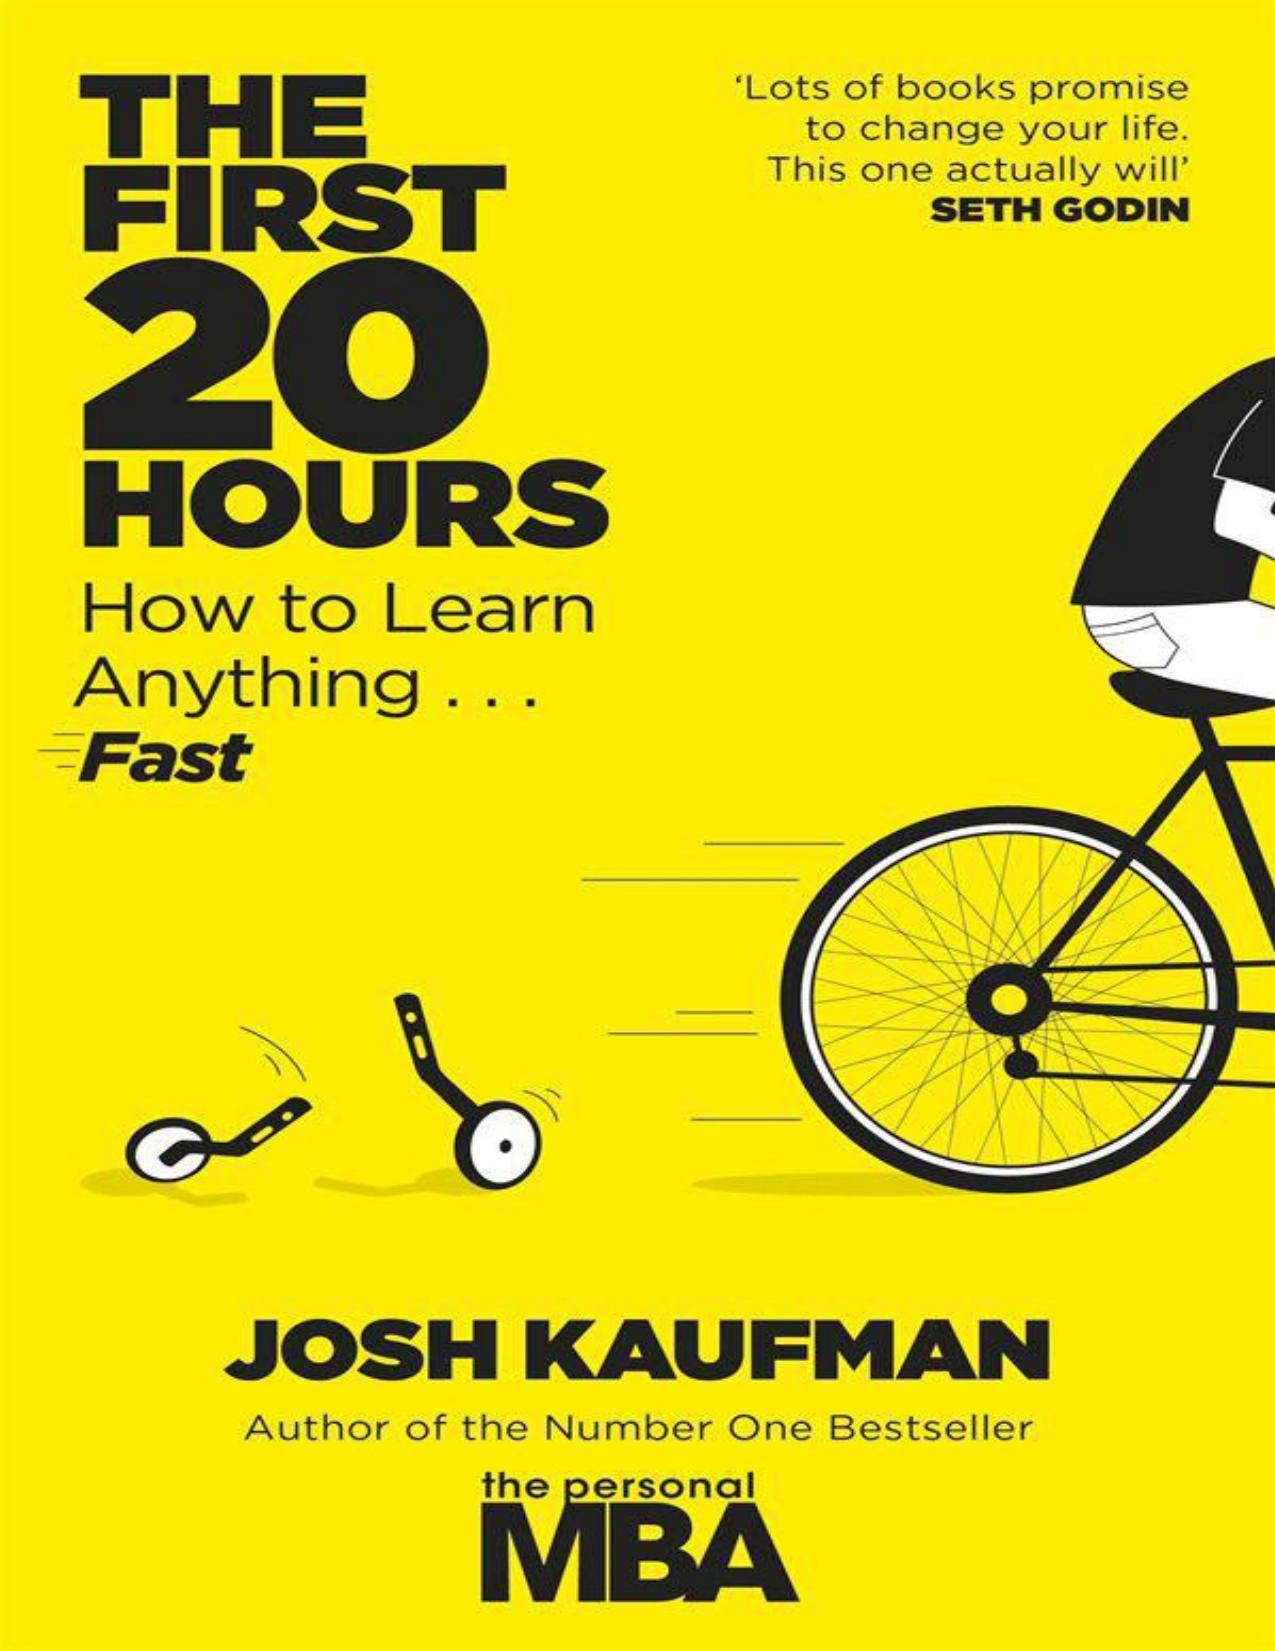 The First 20 Hours: How to Learn Anything ... Fast by Kaufman Josh